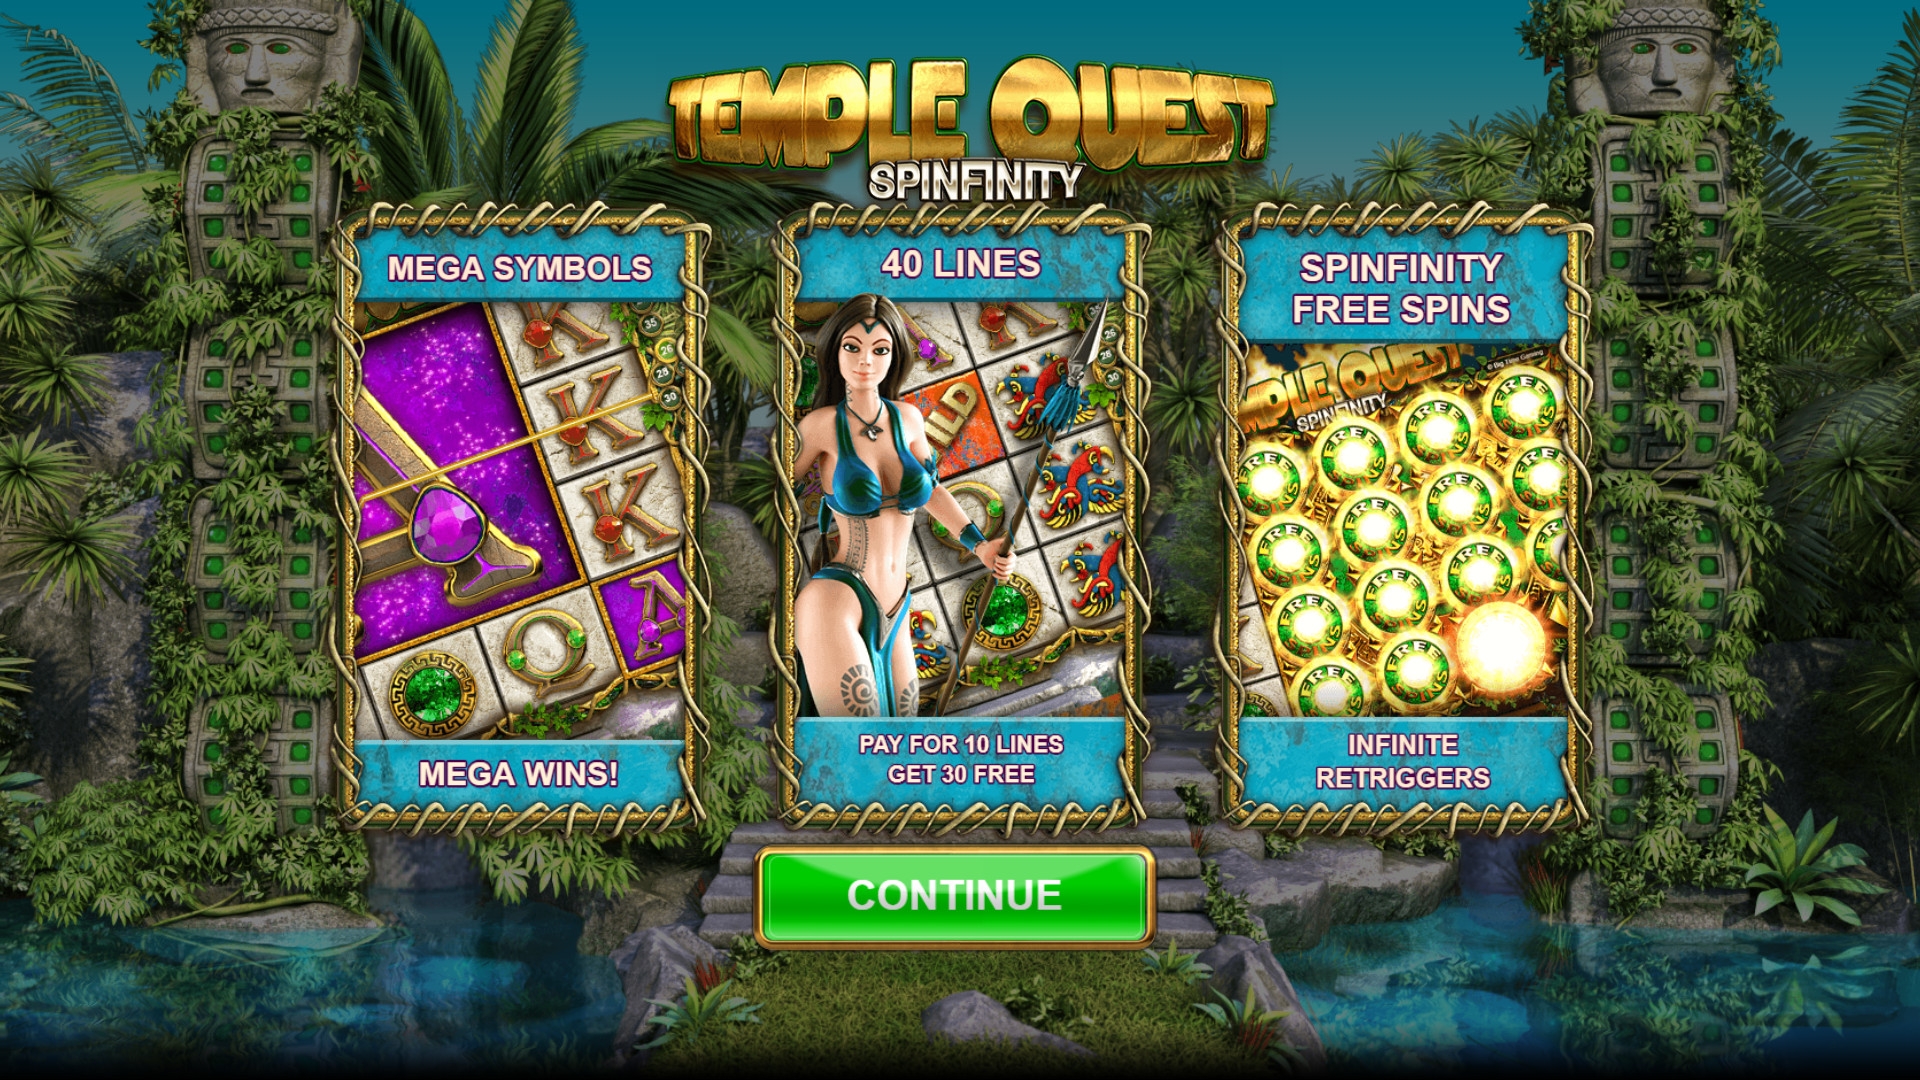 Epic spins. Temple Quest Spinfinity. Игровой автомат Quest. The Quest for Gold слот.